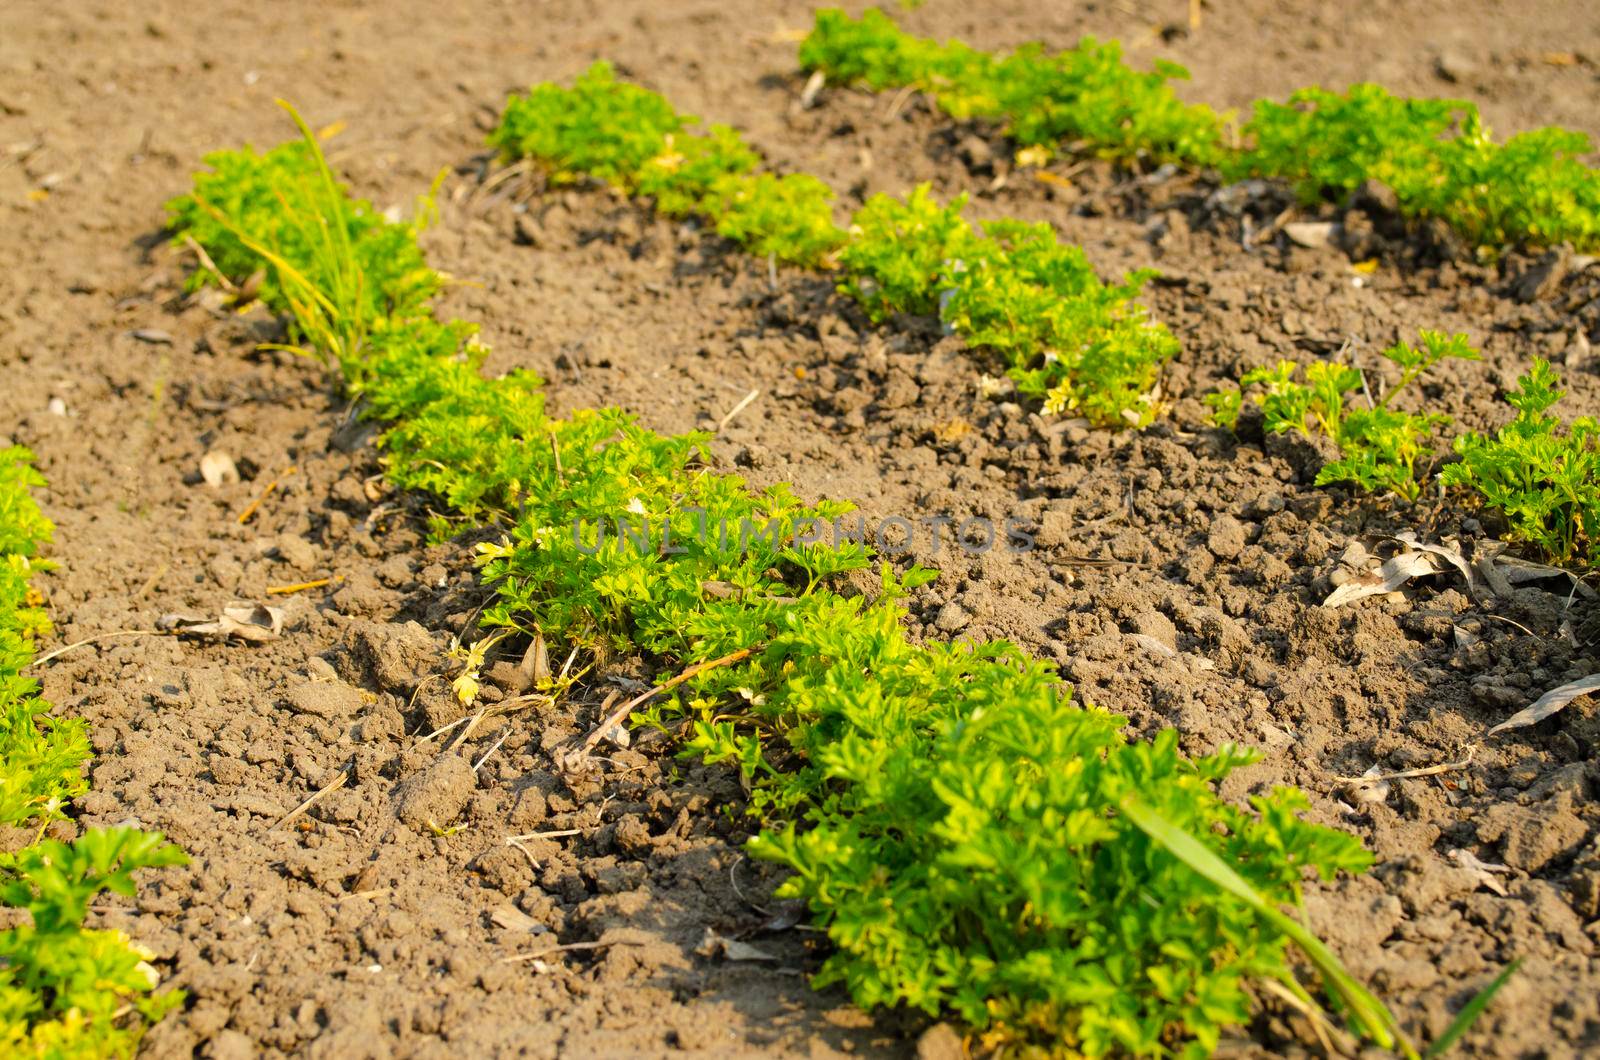 Young parsley bed. The first vegetables in the garden in early spring. Eco cultivation on raised beds without the use of fertilizers. Parsley sprouts on fertile soil. by mtx